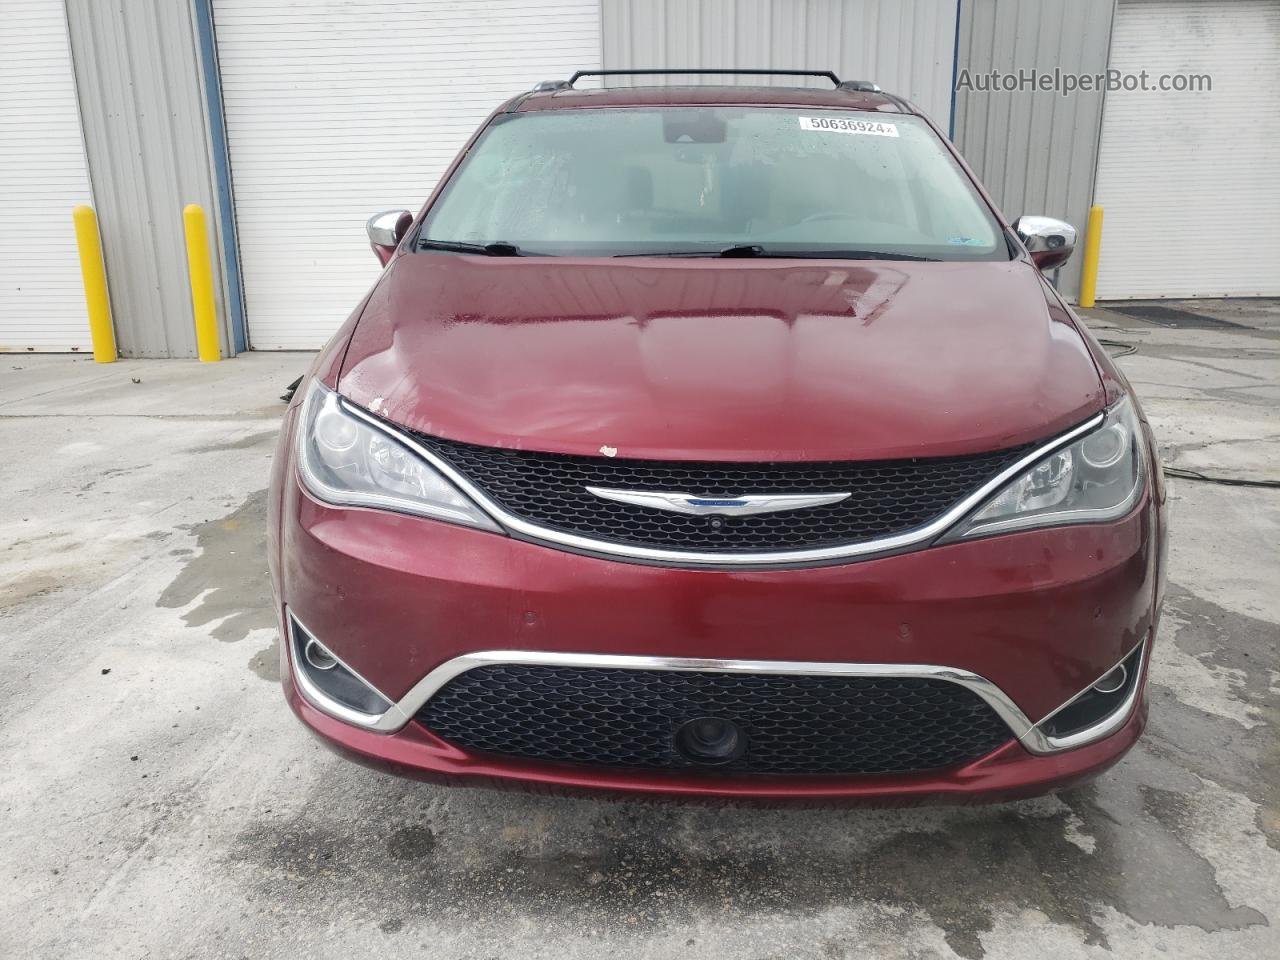 2017 Chrysler Pacifica Limited Бордовый vin: 2C4RC1GG3HR545280